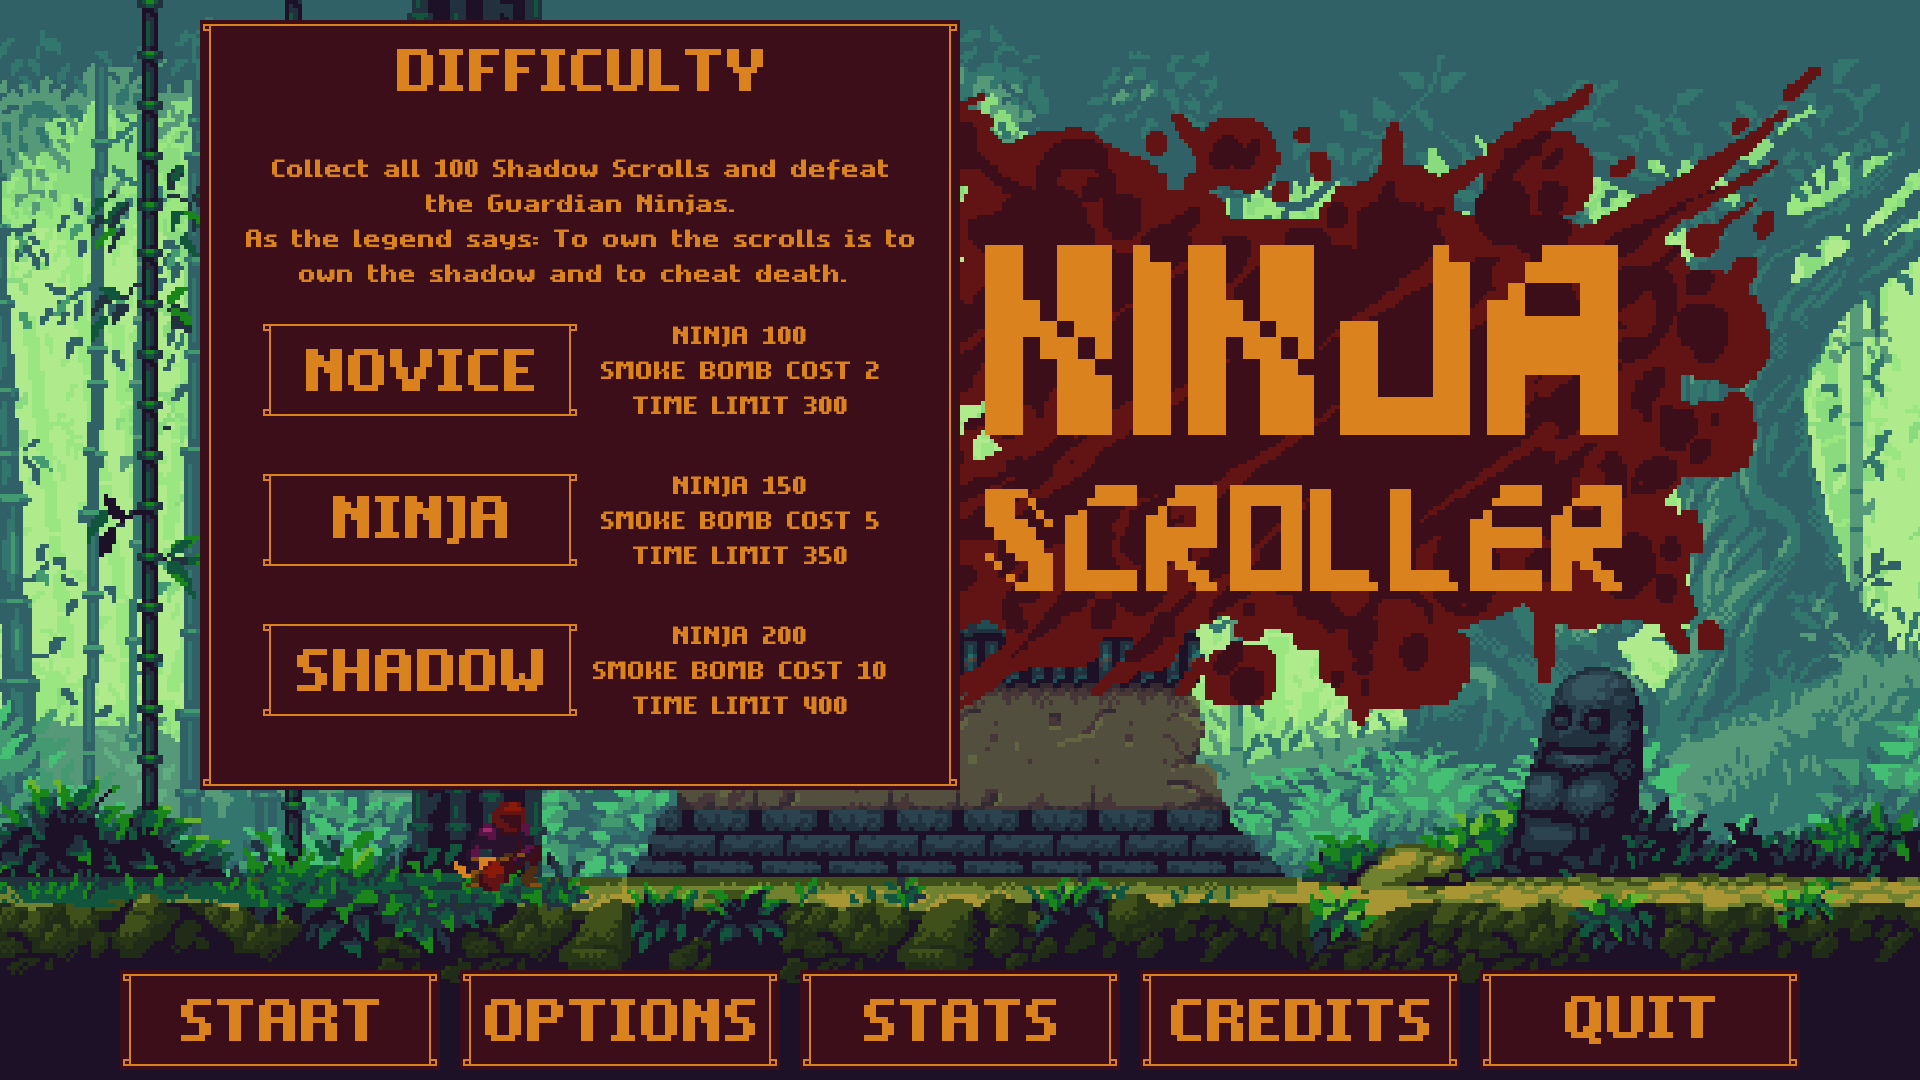 Ninja Scroller by Mars Touch Studio - Difficulty Screen